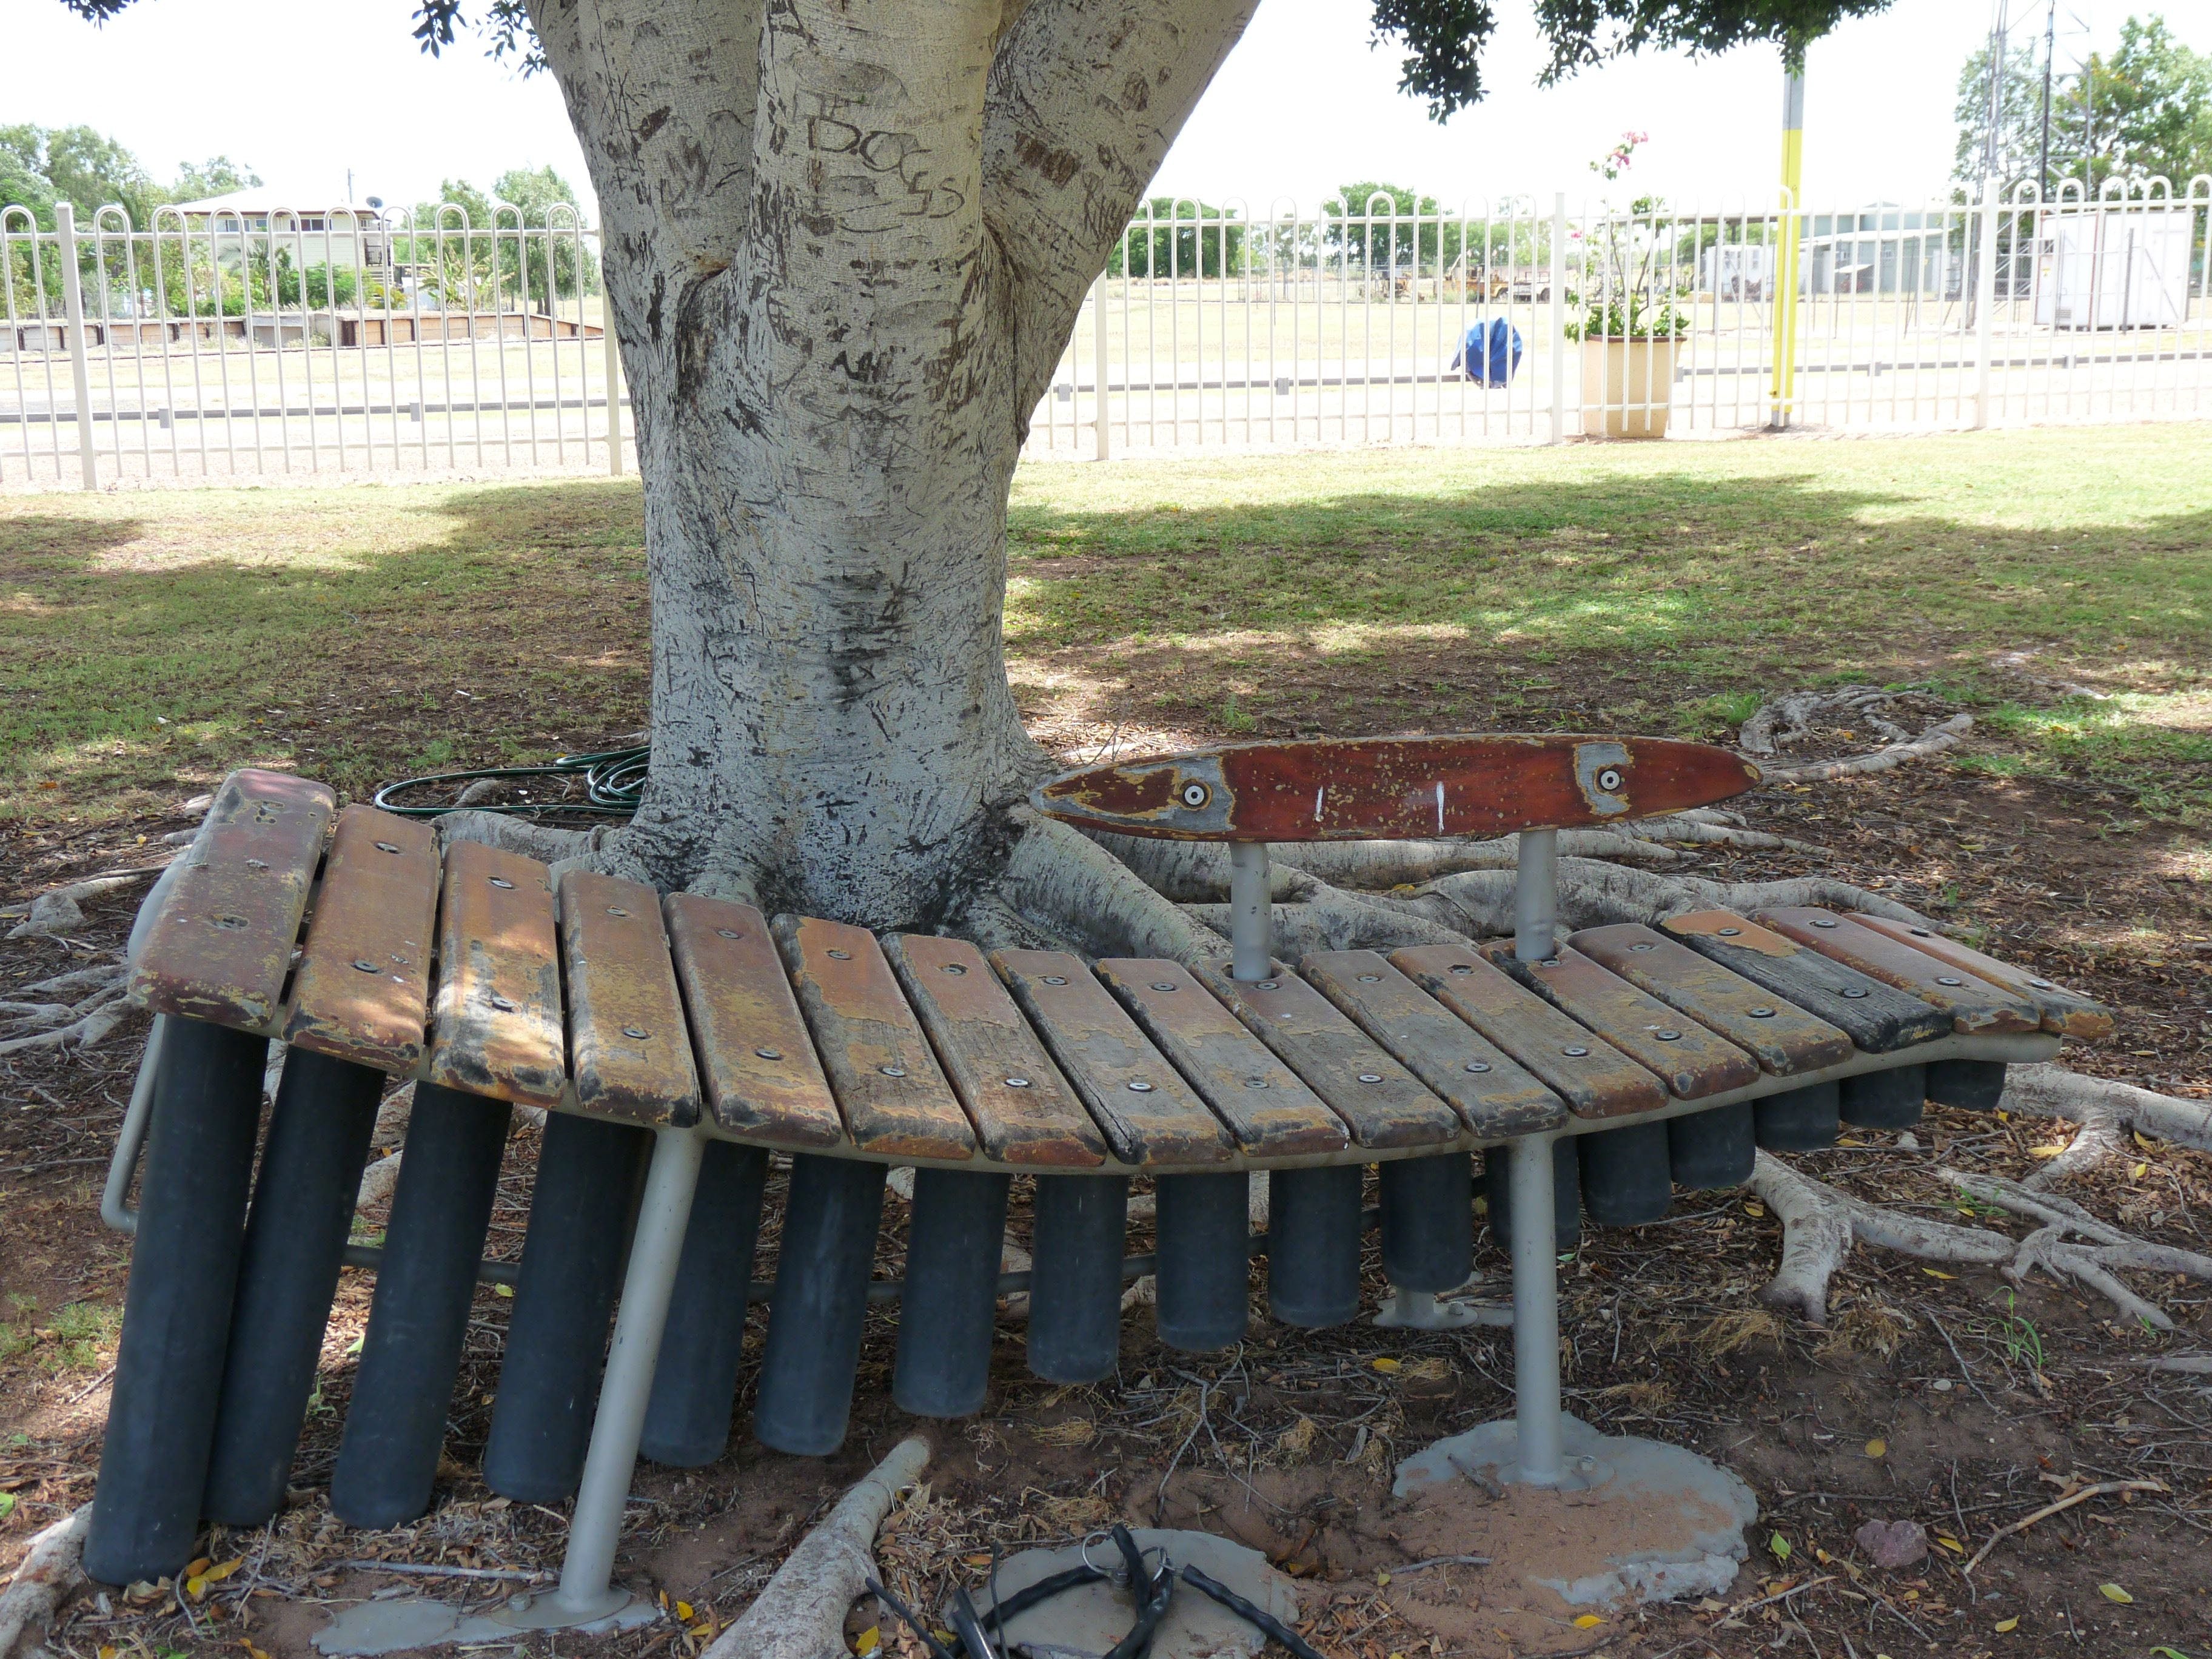 Barcaldine Musical Instruments - Broome Tourism